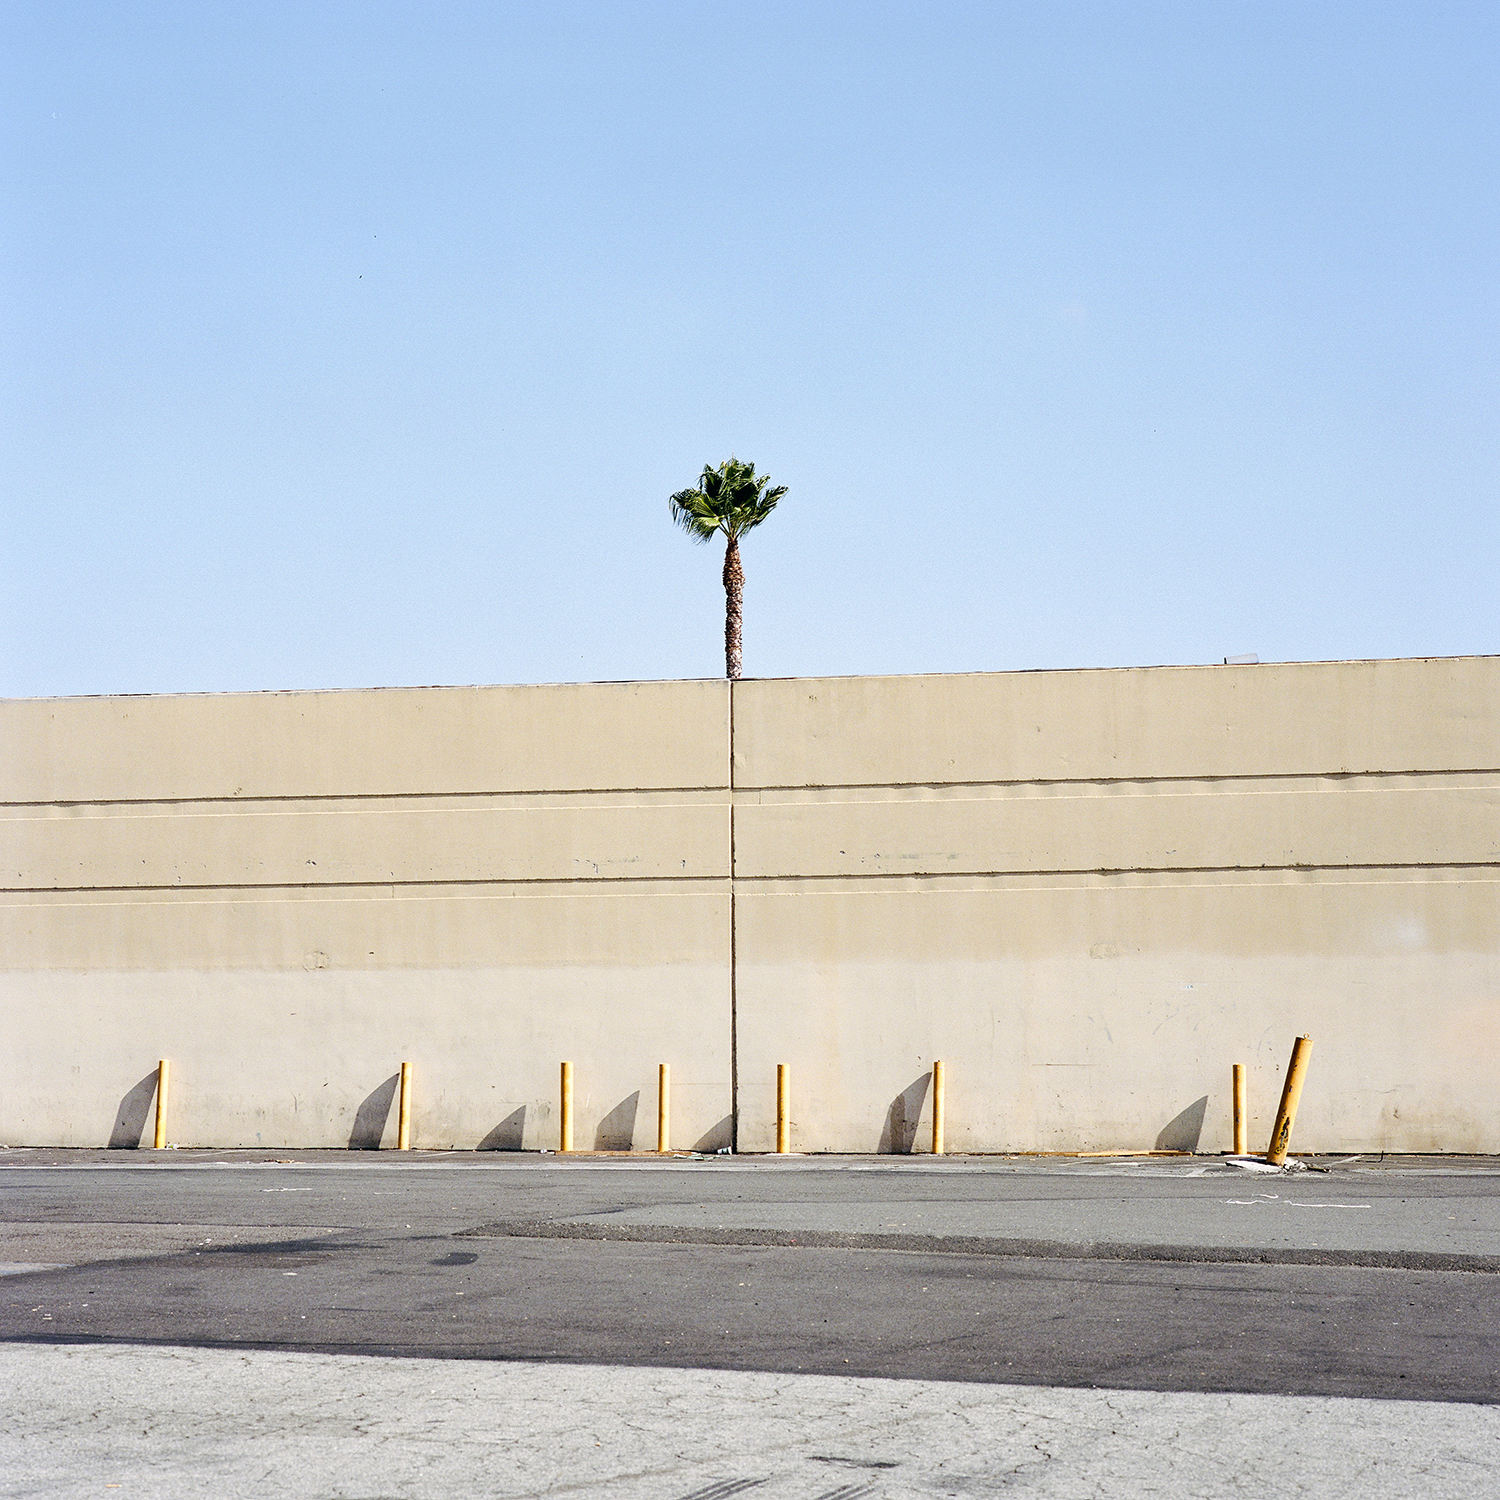 Unusual Trees and Topiaries Sprout Alongside Buildings in a Photo Series by Sinziana Velicescu